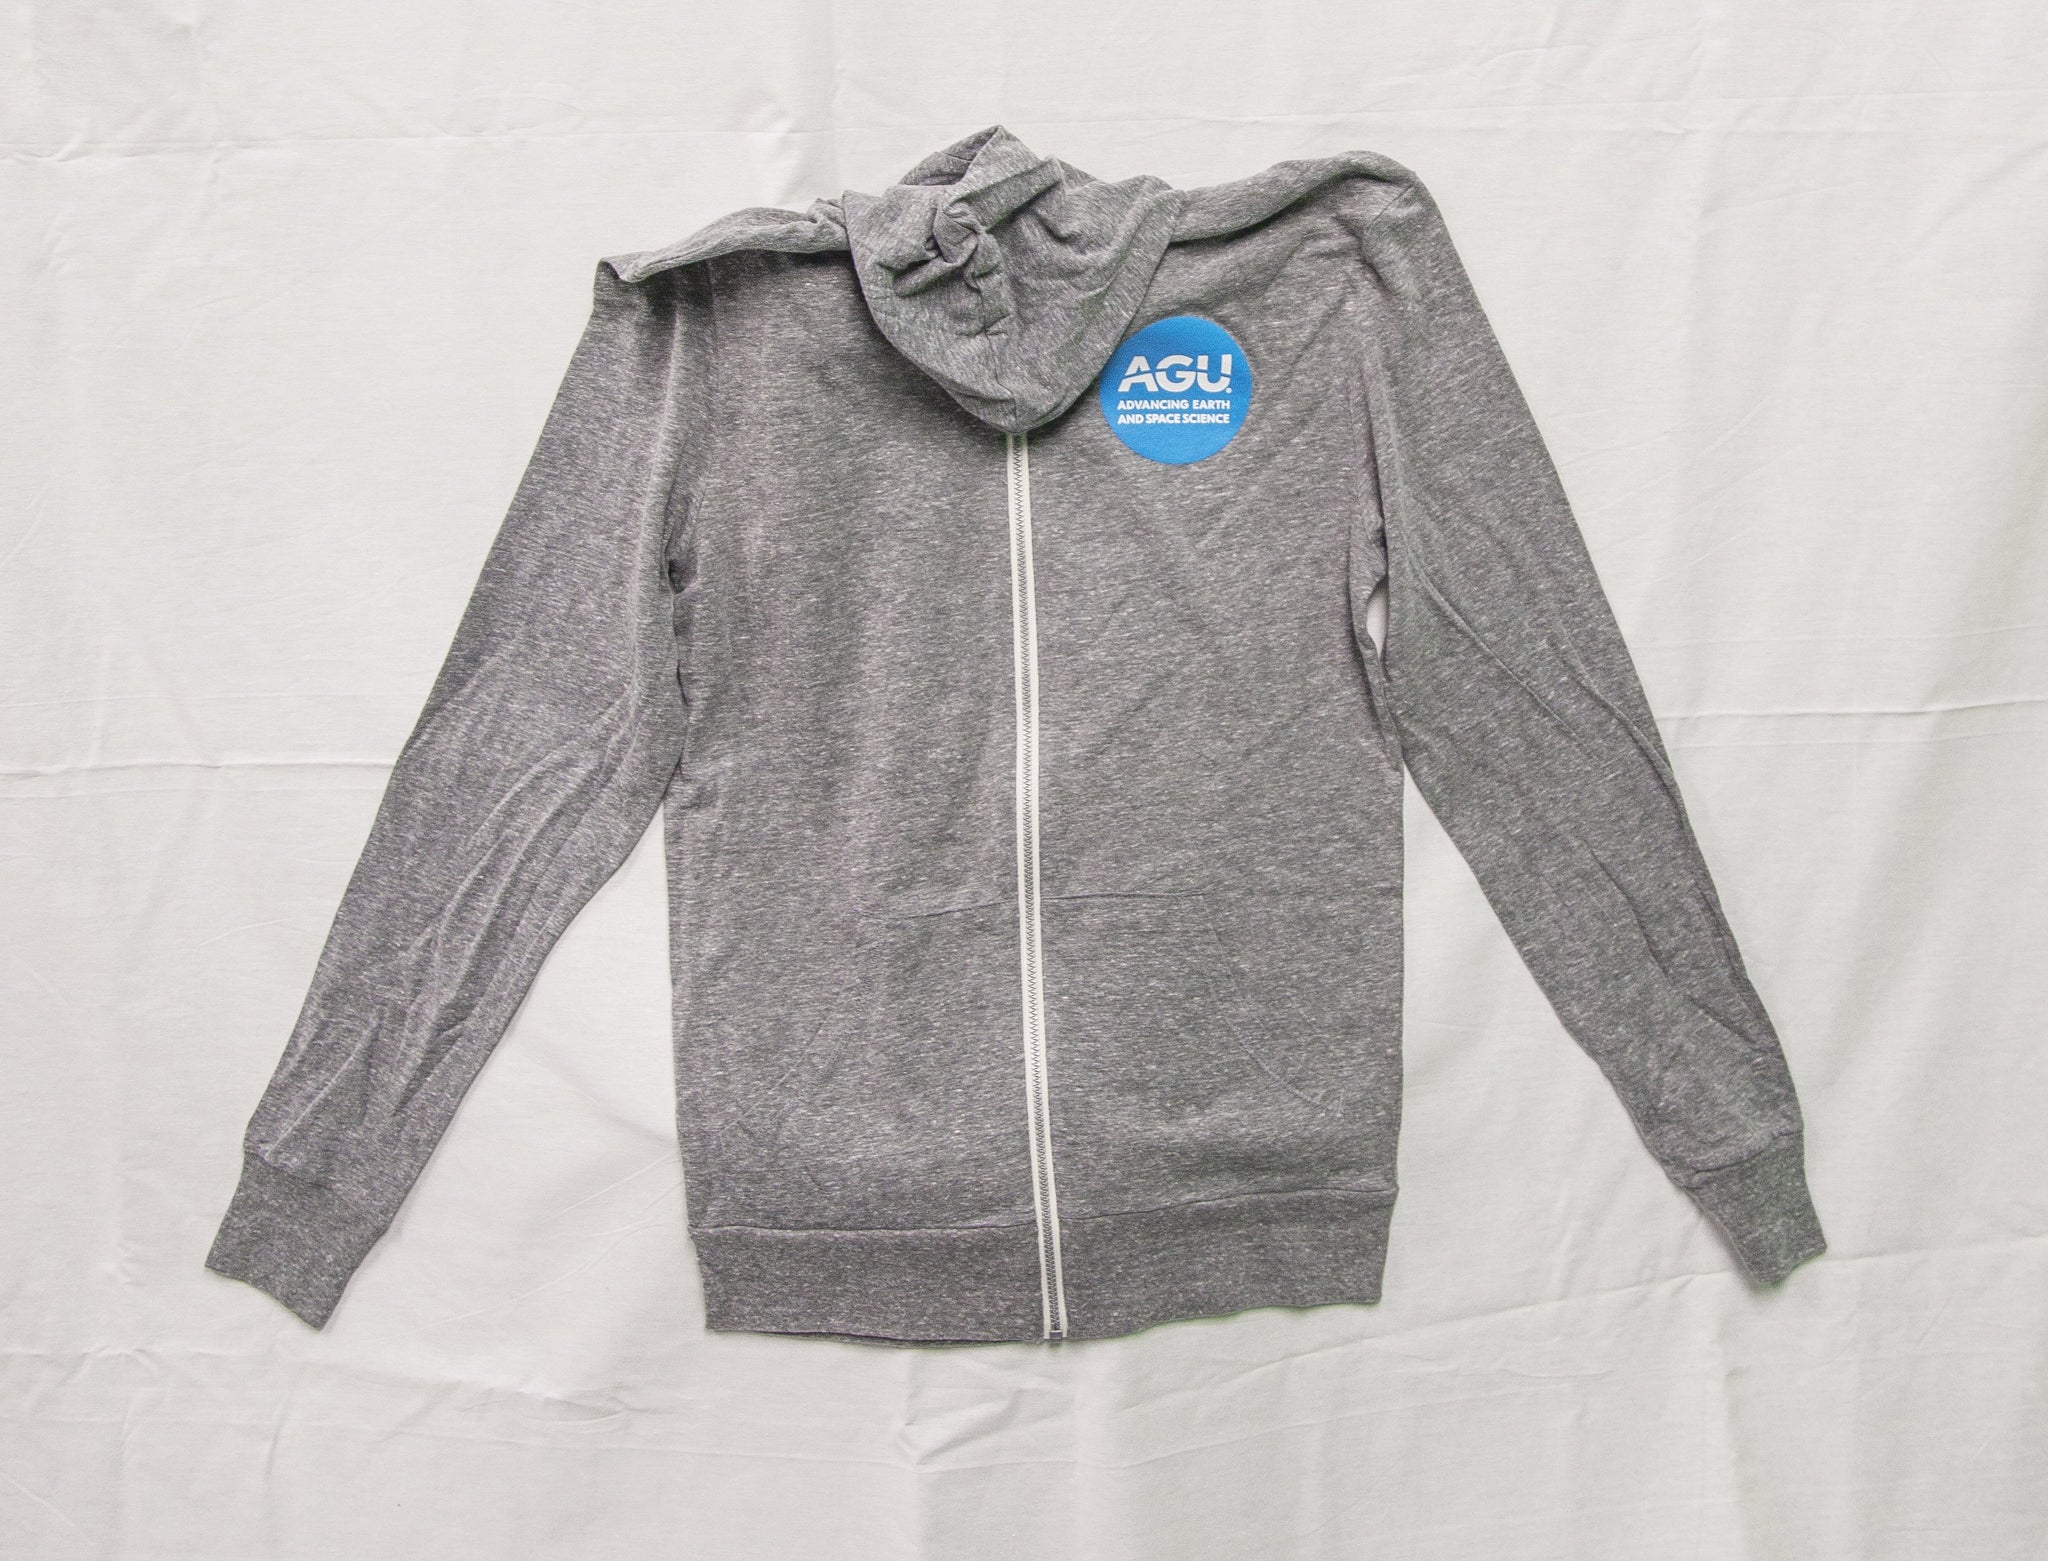 Lightweight gray zip-up hoodie with AGU logo printed in white and blue